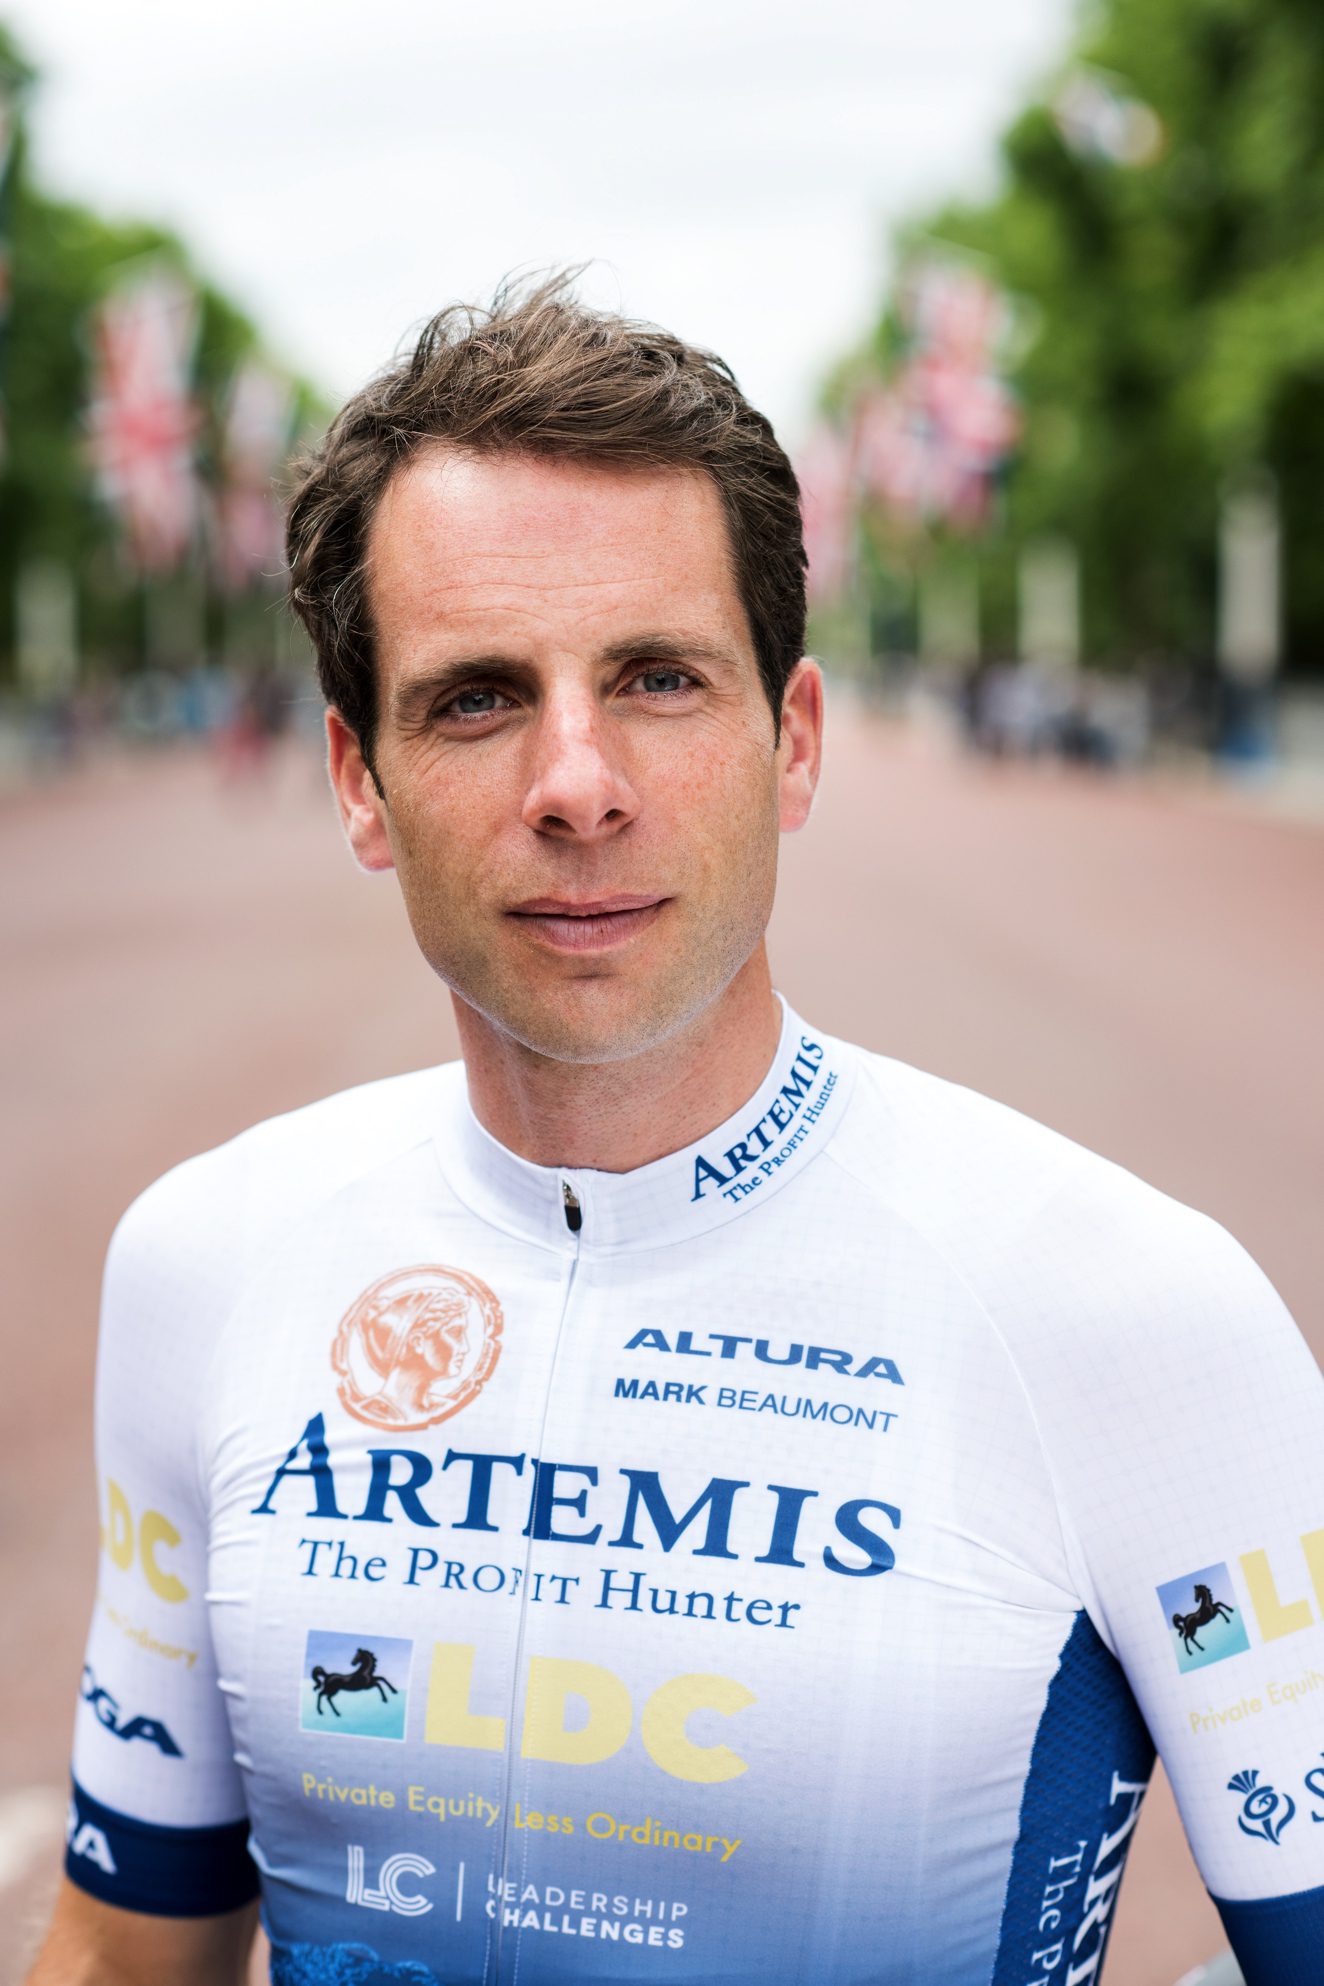 World Record Cyclist set to speak at CMAE European Conference and world class venue announced for gala dinner